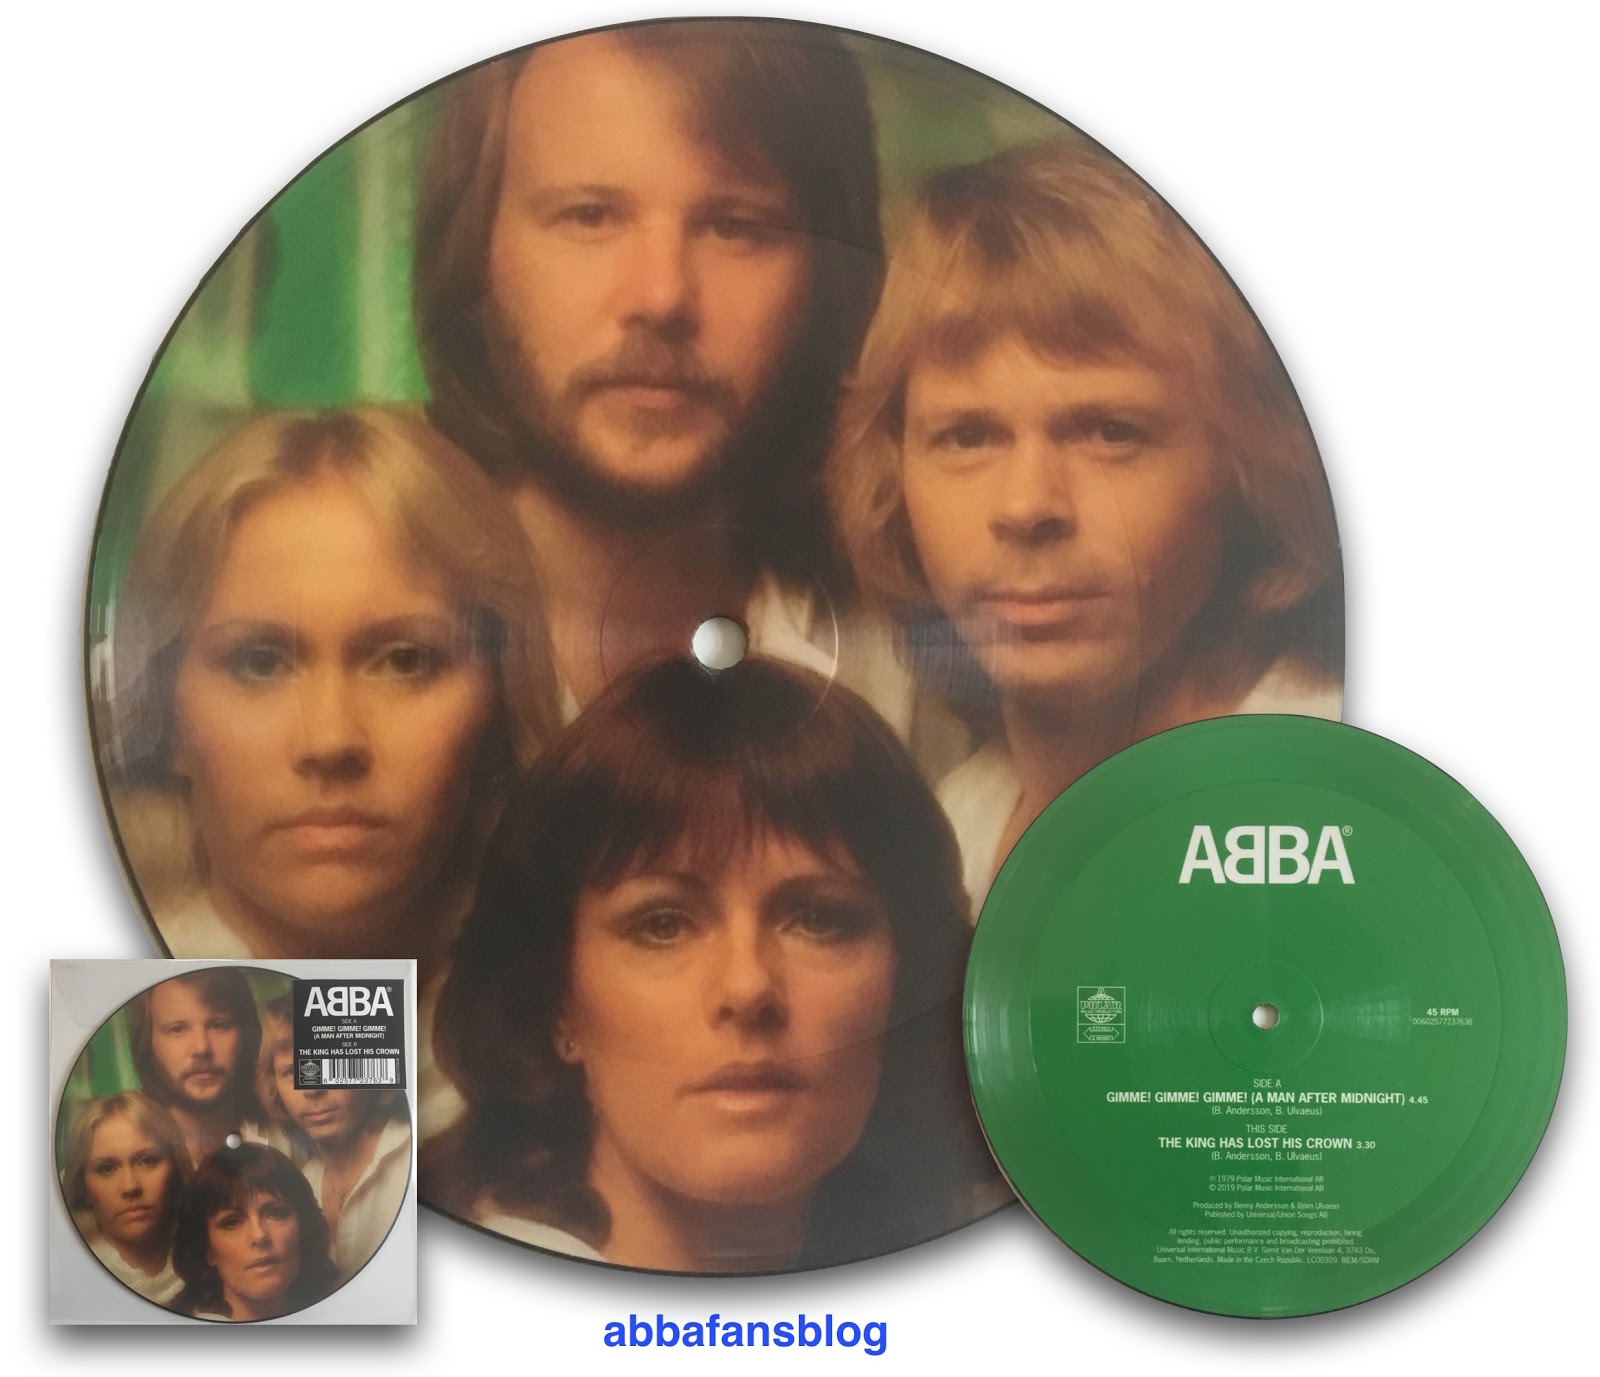 ABBA Gimme Gimme пластинка. ABBA - Gimme! Gimme! Gimme! (A man after Midnight). Абба пластинки фото. ABBA - Gimme! Gimme! Gimme каверы. Песня abba gimme gimme gimme